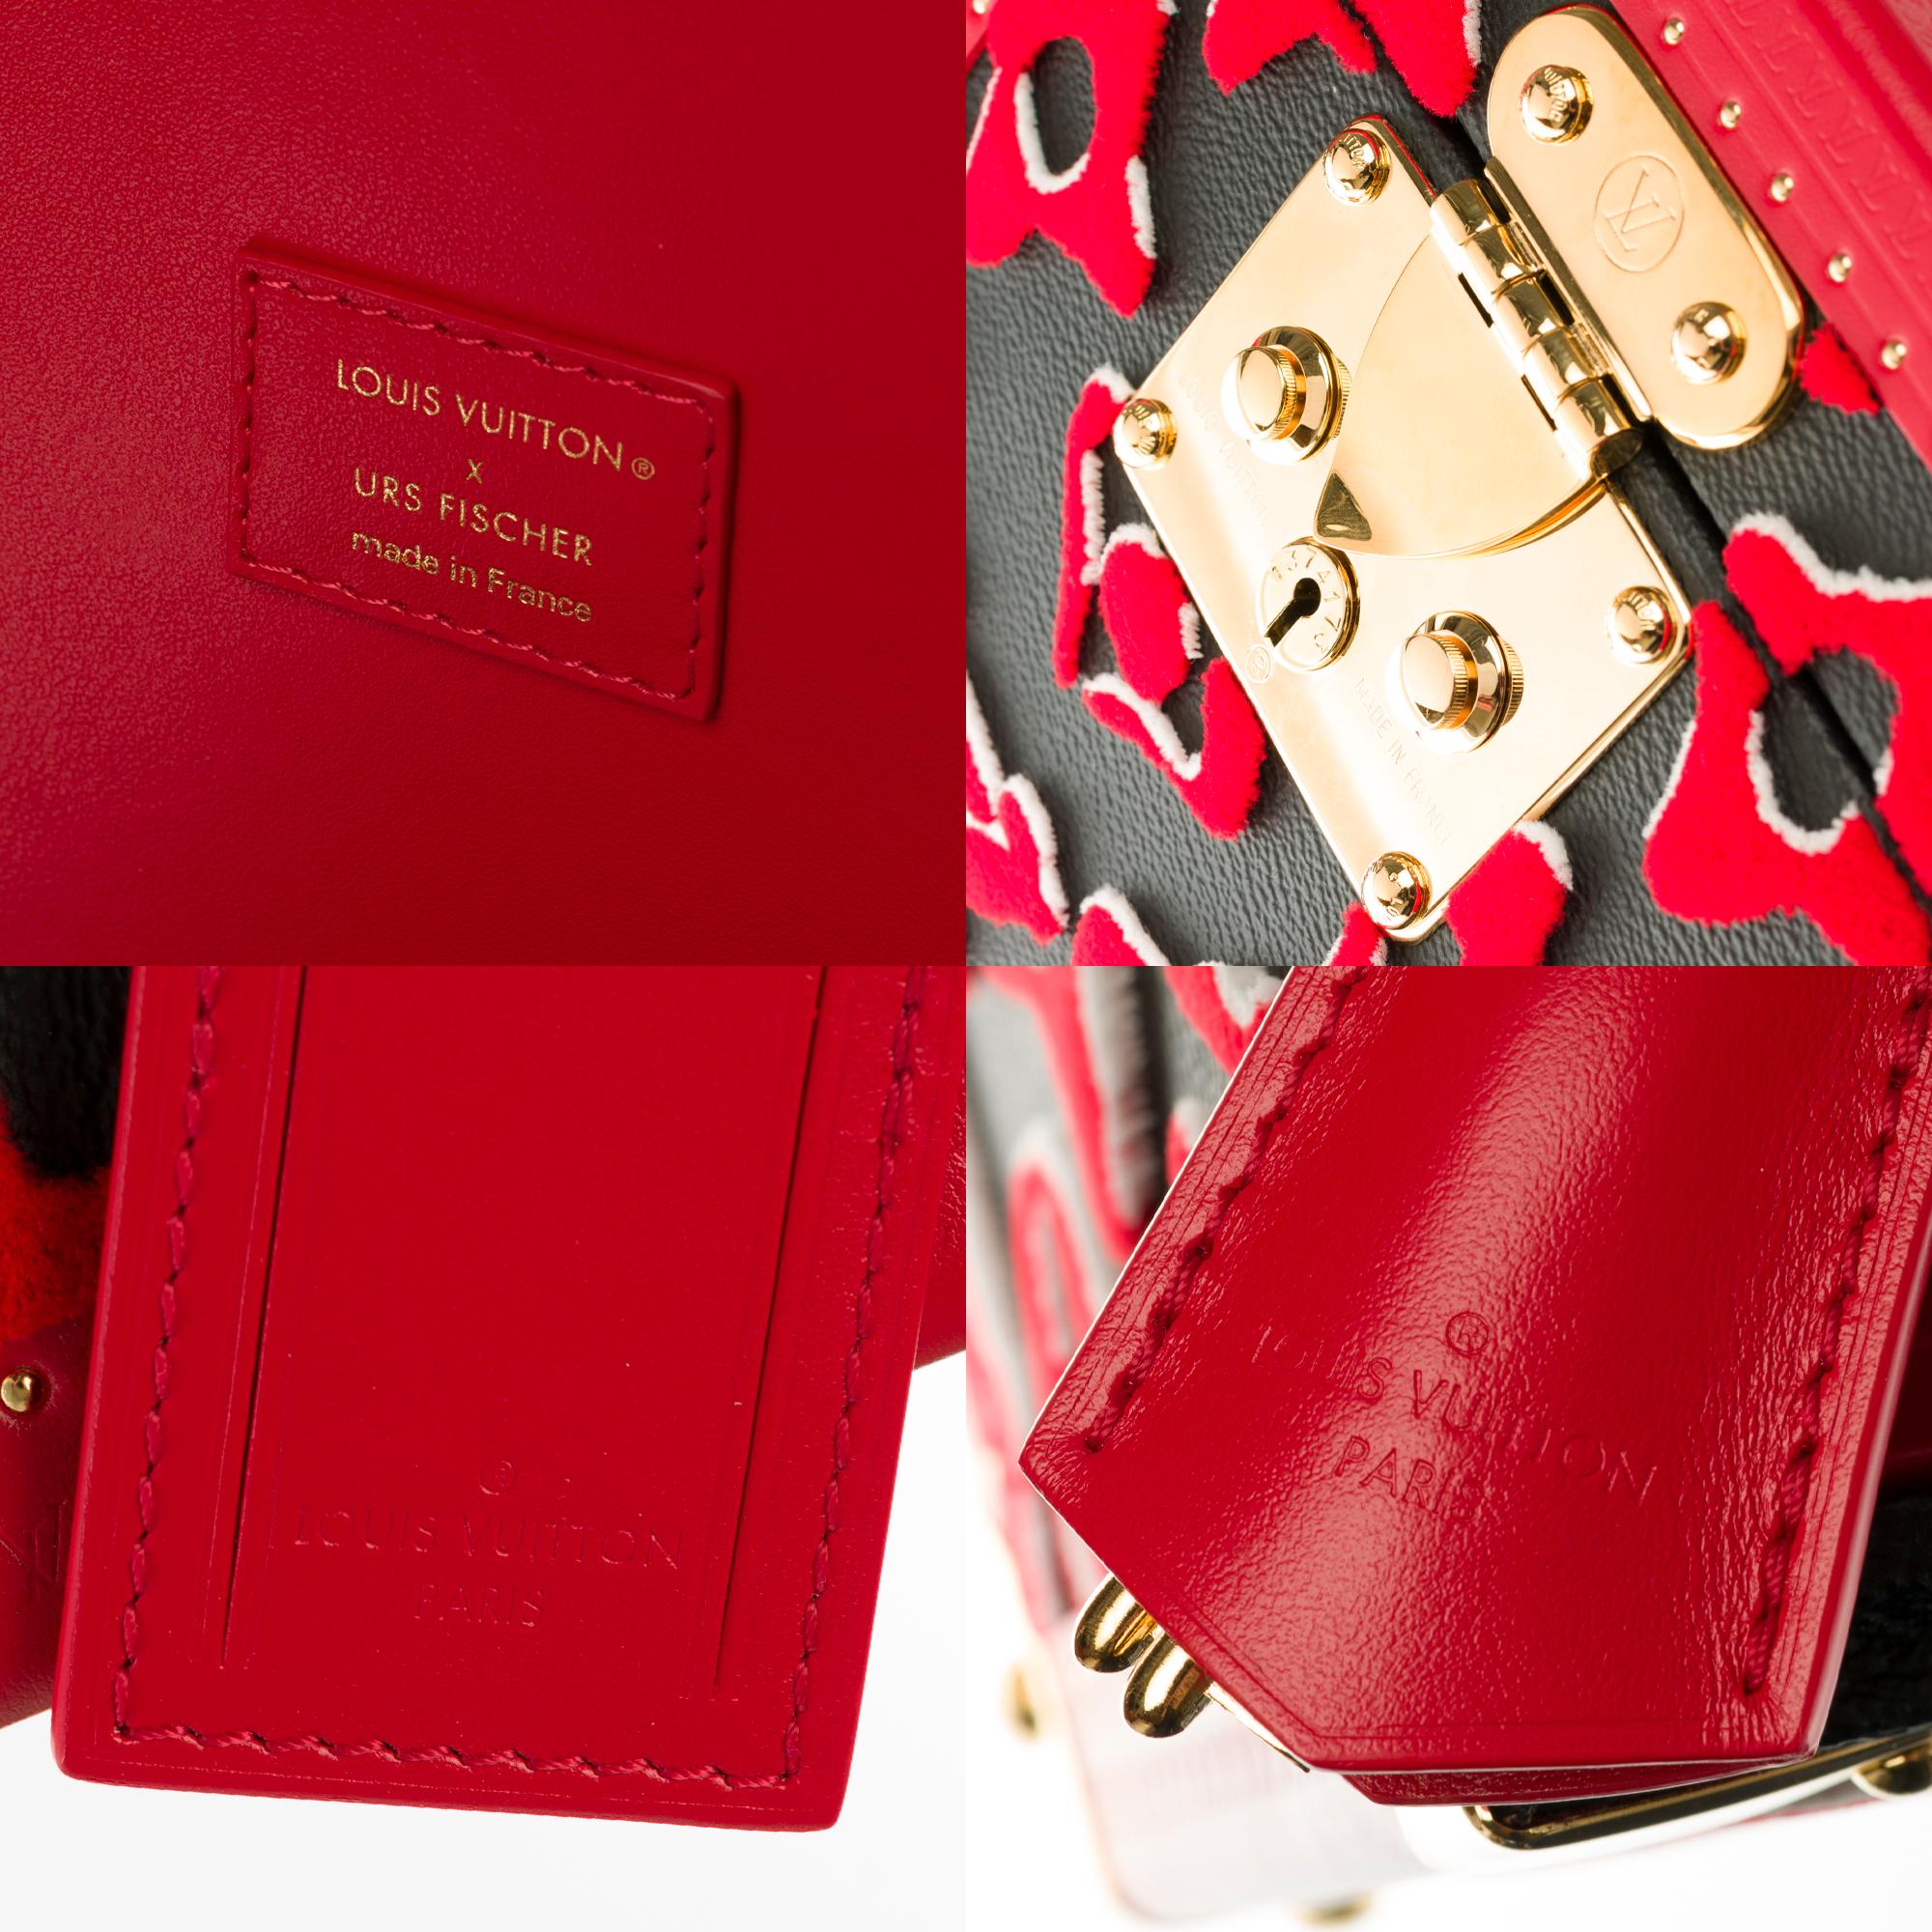 Ultra limited/Few pieces in the world/Louis Vuitton Vanity Case in red Tufa 1